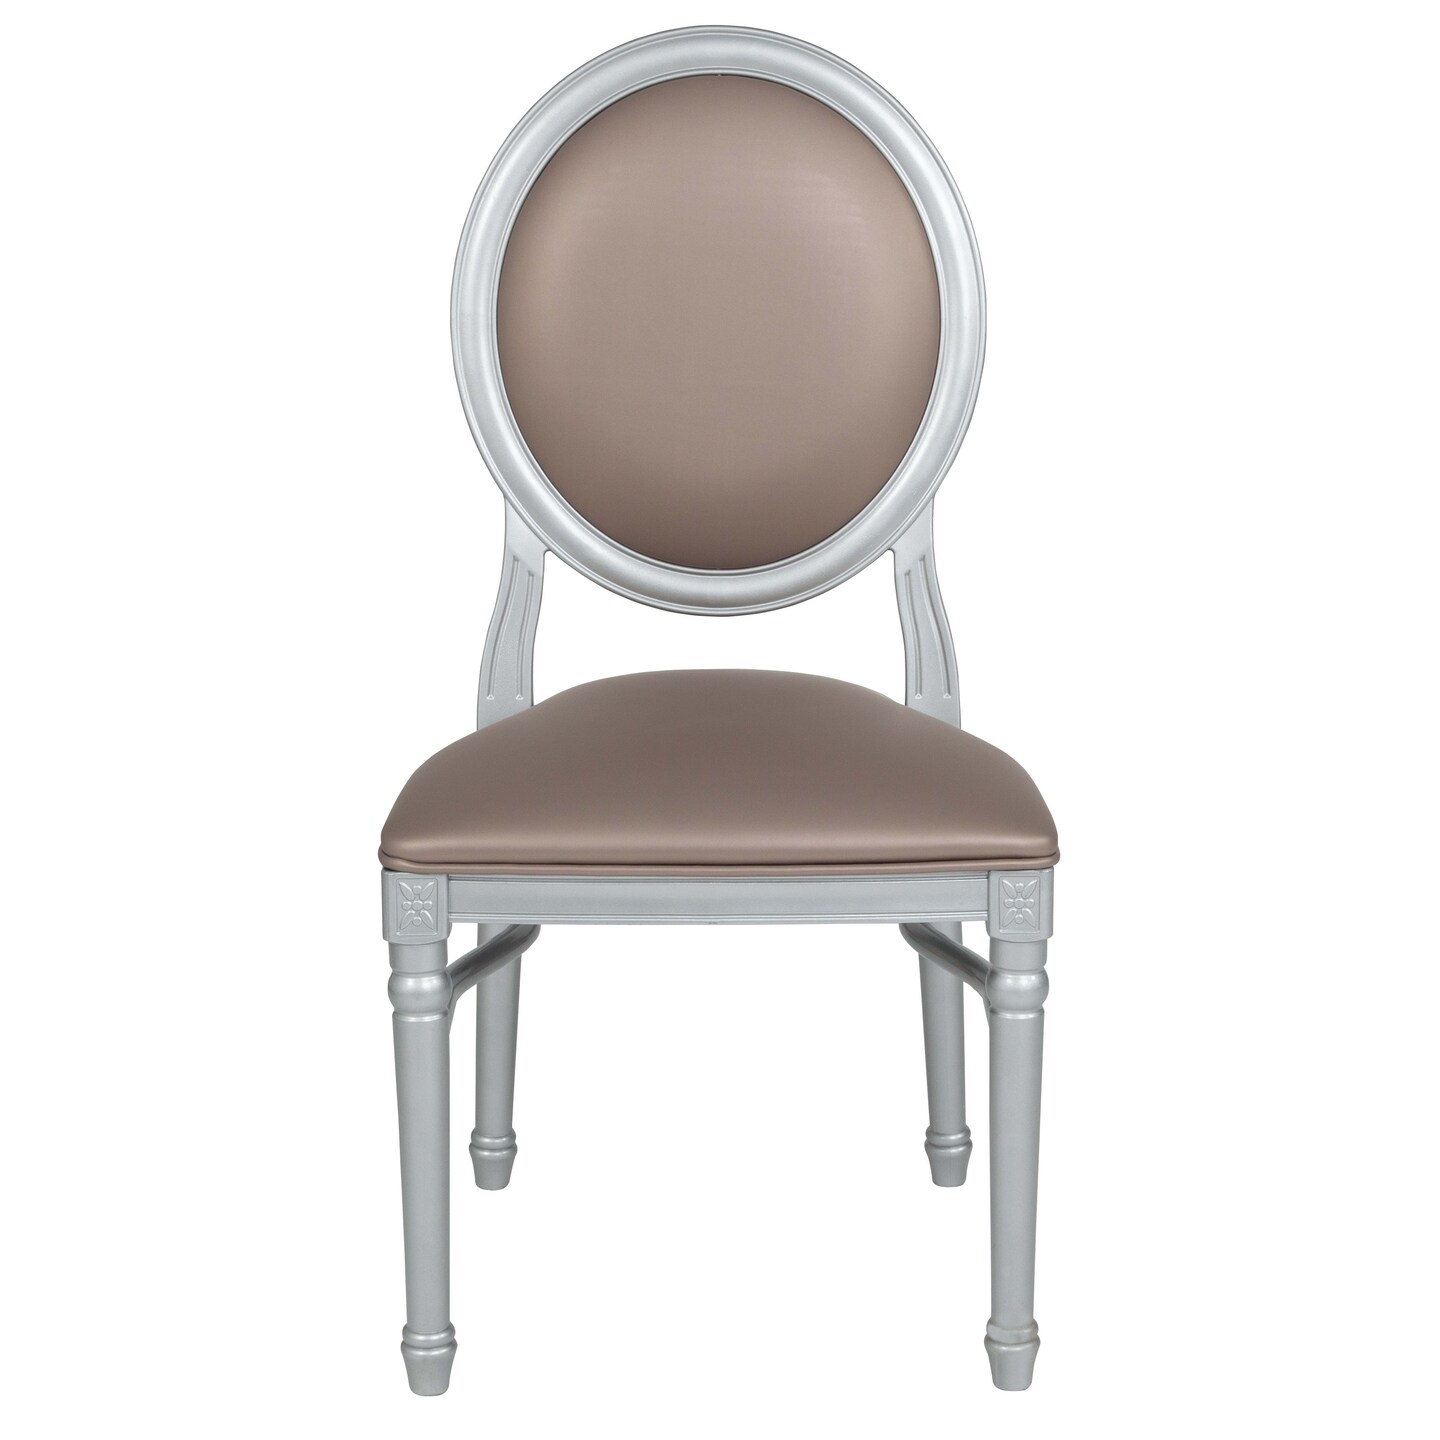 Emma and Oliver King Louis Dining Side Chair, Desk Chair